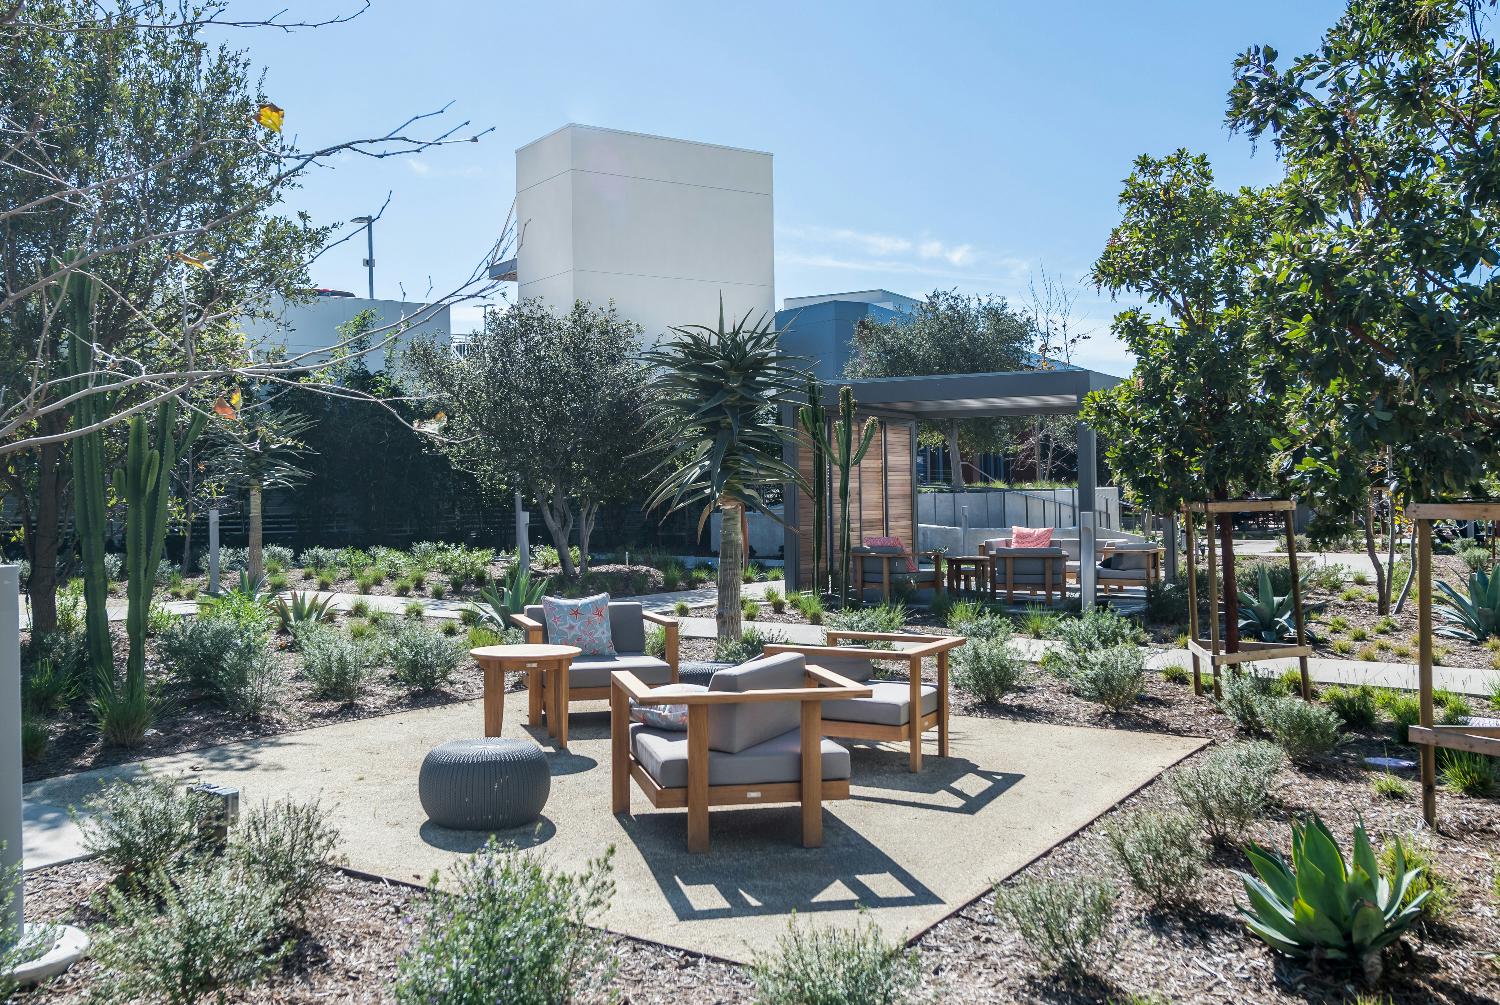 Think outside the box? No think outside the office! Take a peak in our East Campus Courtyard outdoor work spaces.